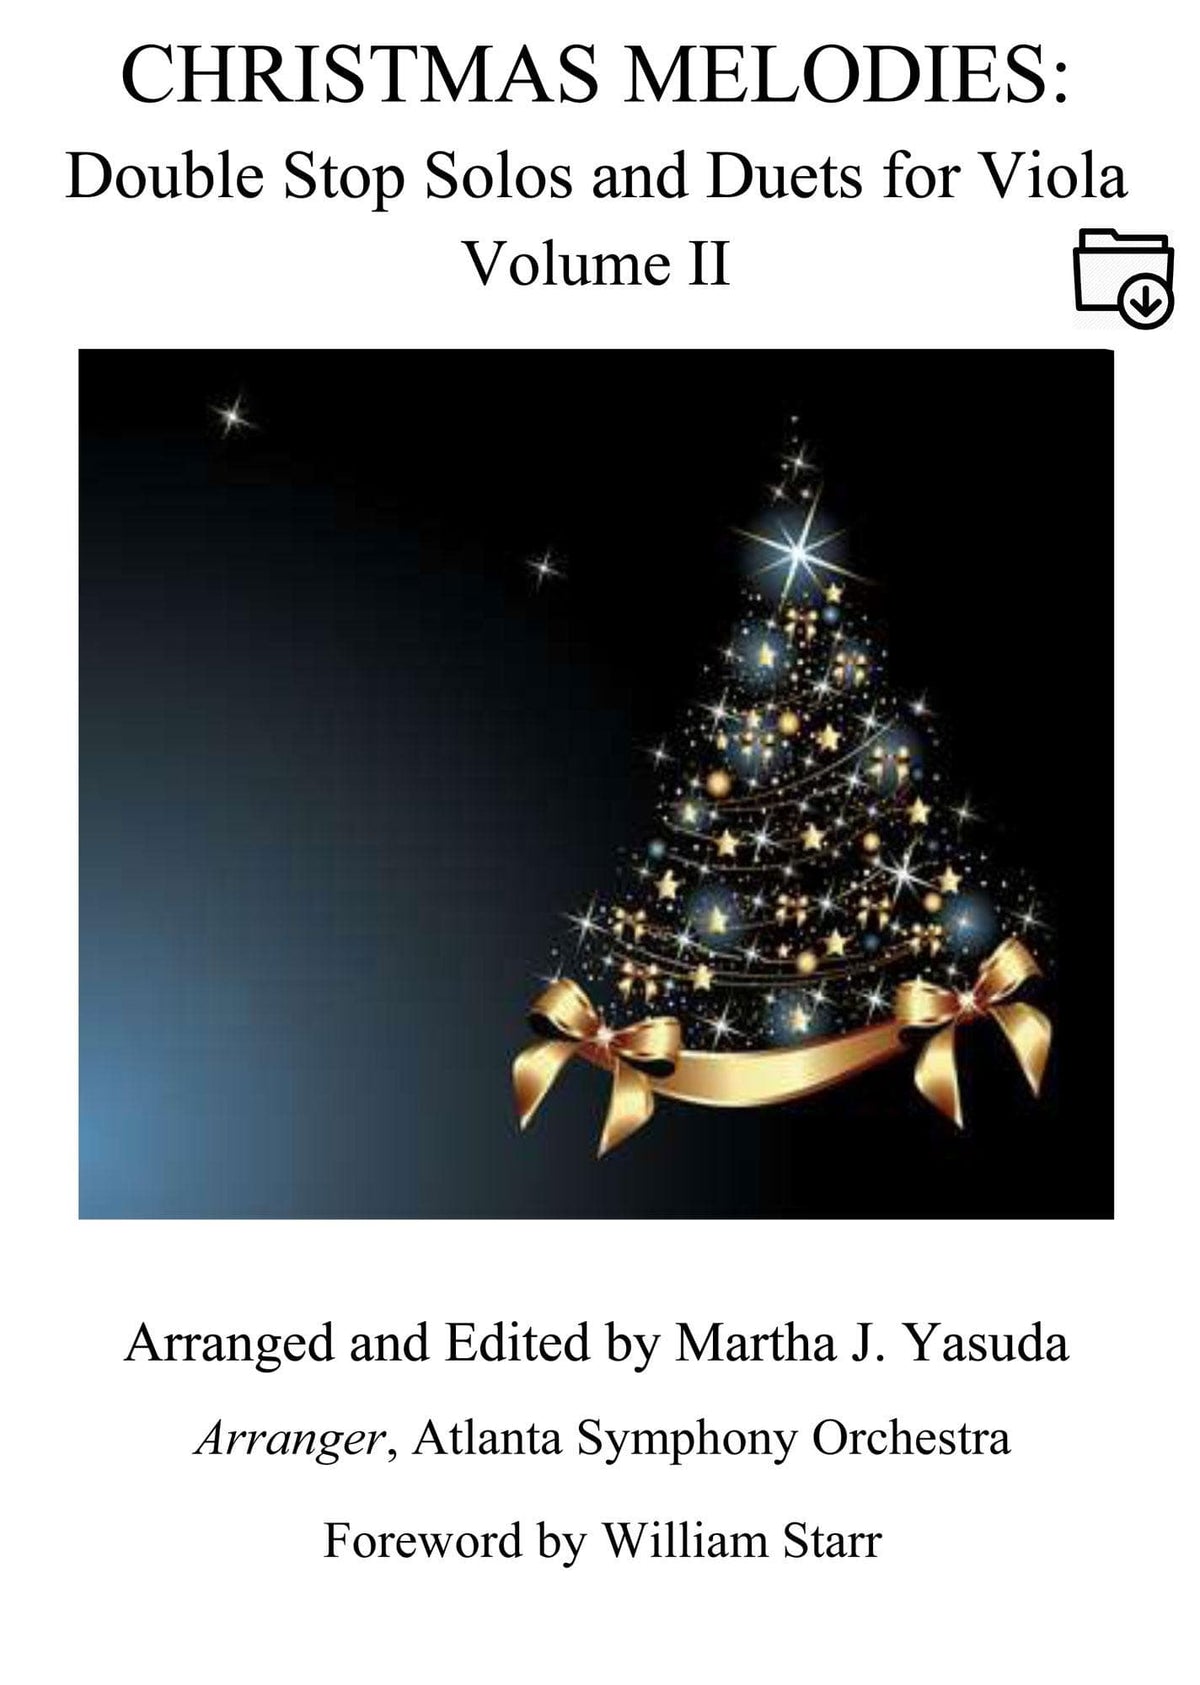 Yasuda, Martha - Christmas Melodies For Viola, Double Stop Solos and Duets, Volume II - Digital Download